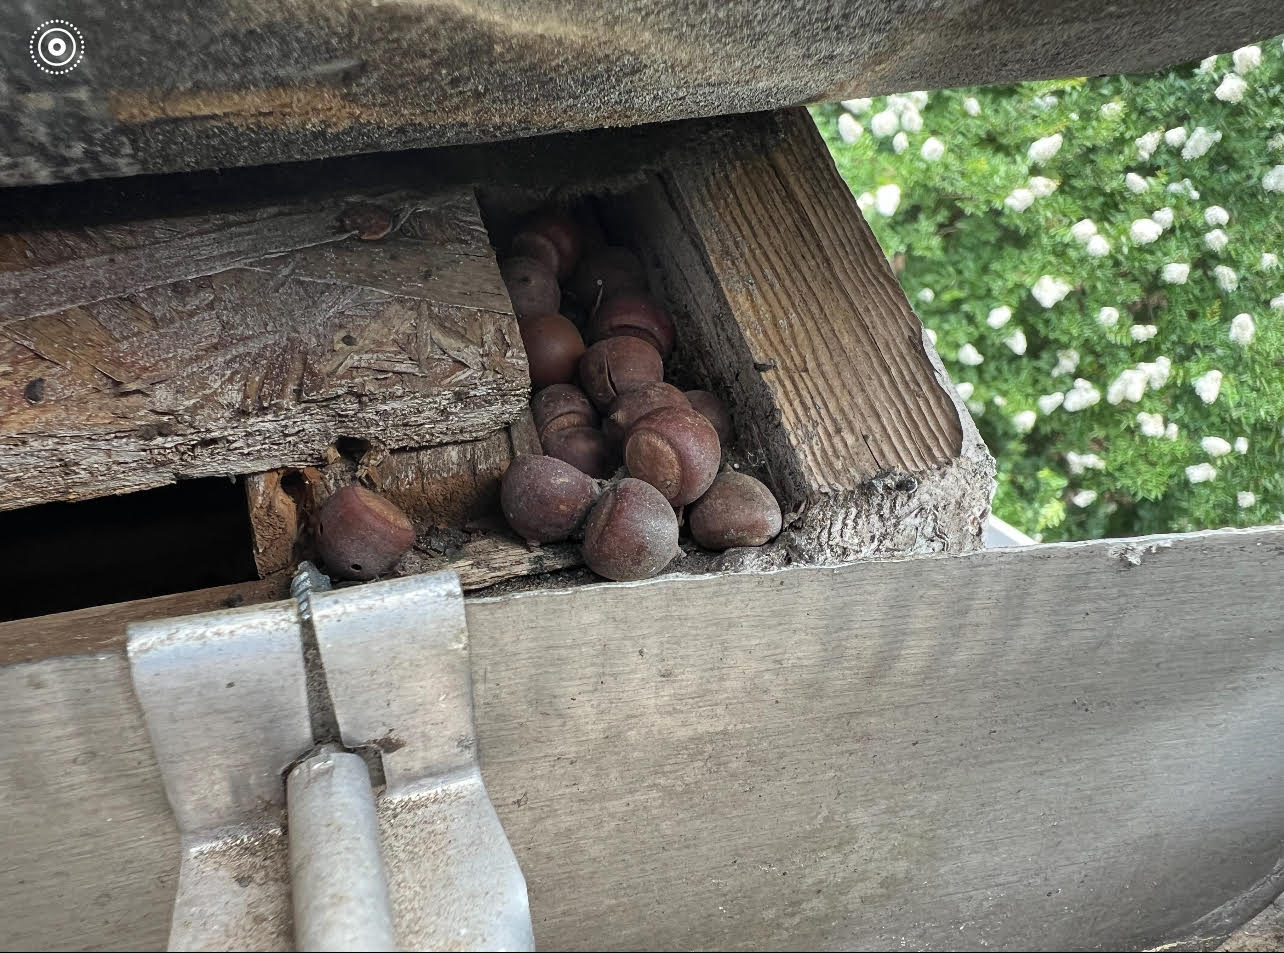 Flying squirrels storing nuts in roof of Rome, Ga attic